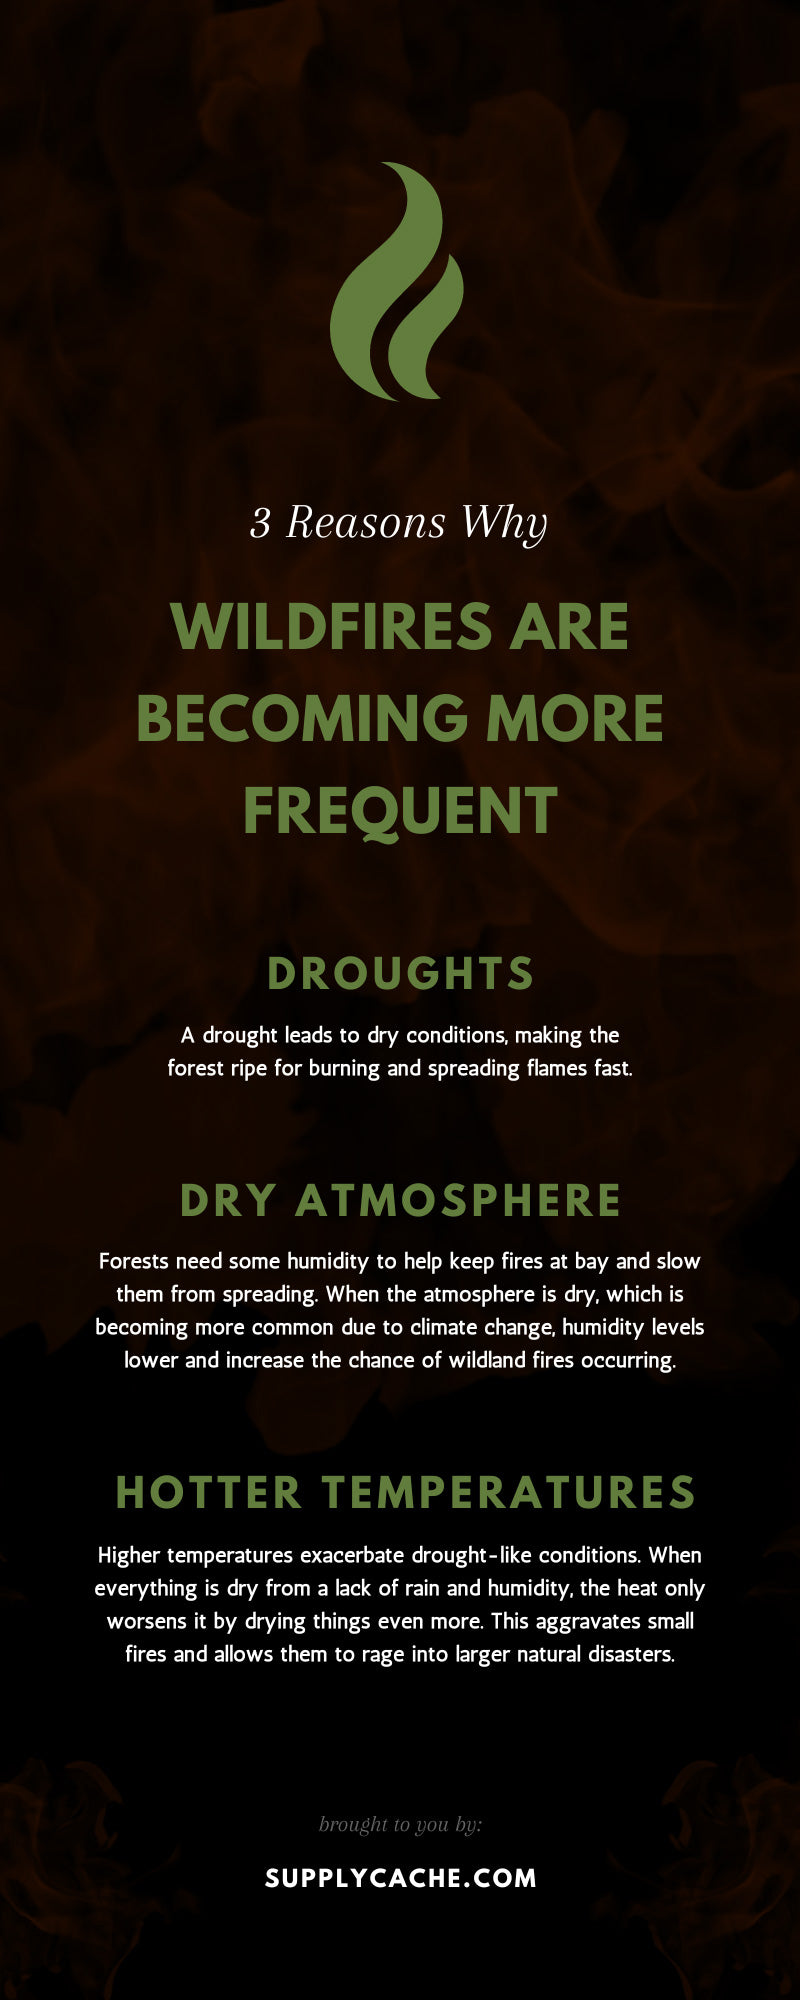 3 Reasons Why Wildfires Are Becoming More Frequent